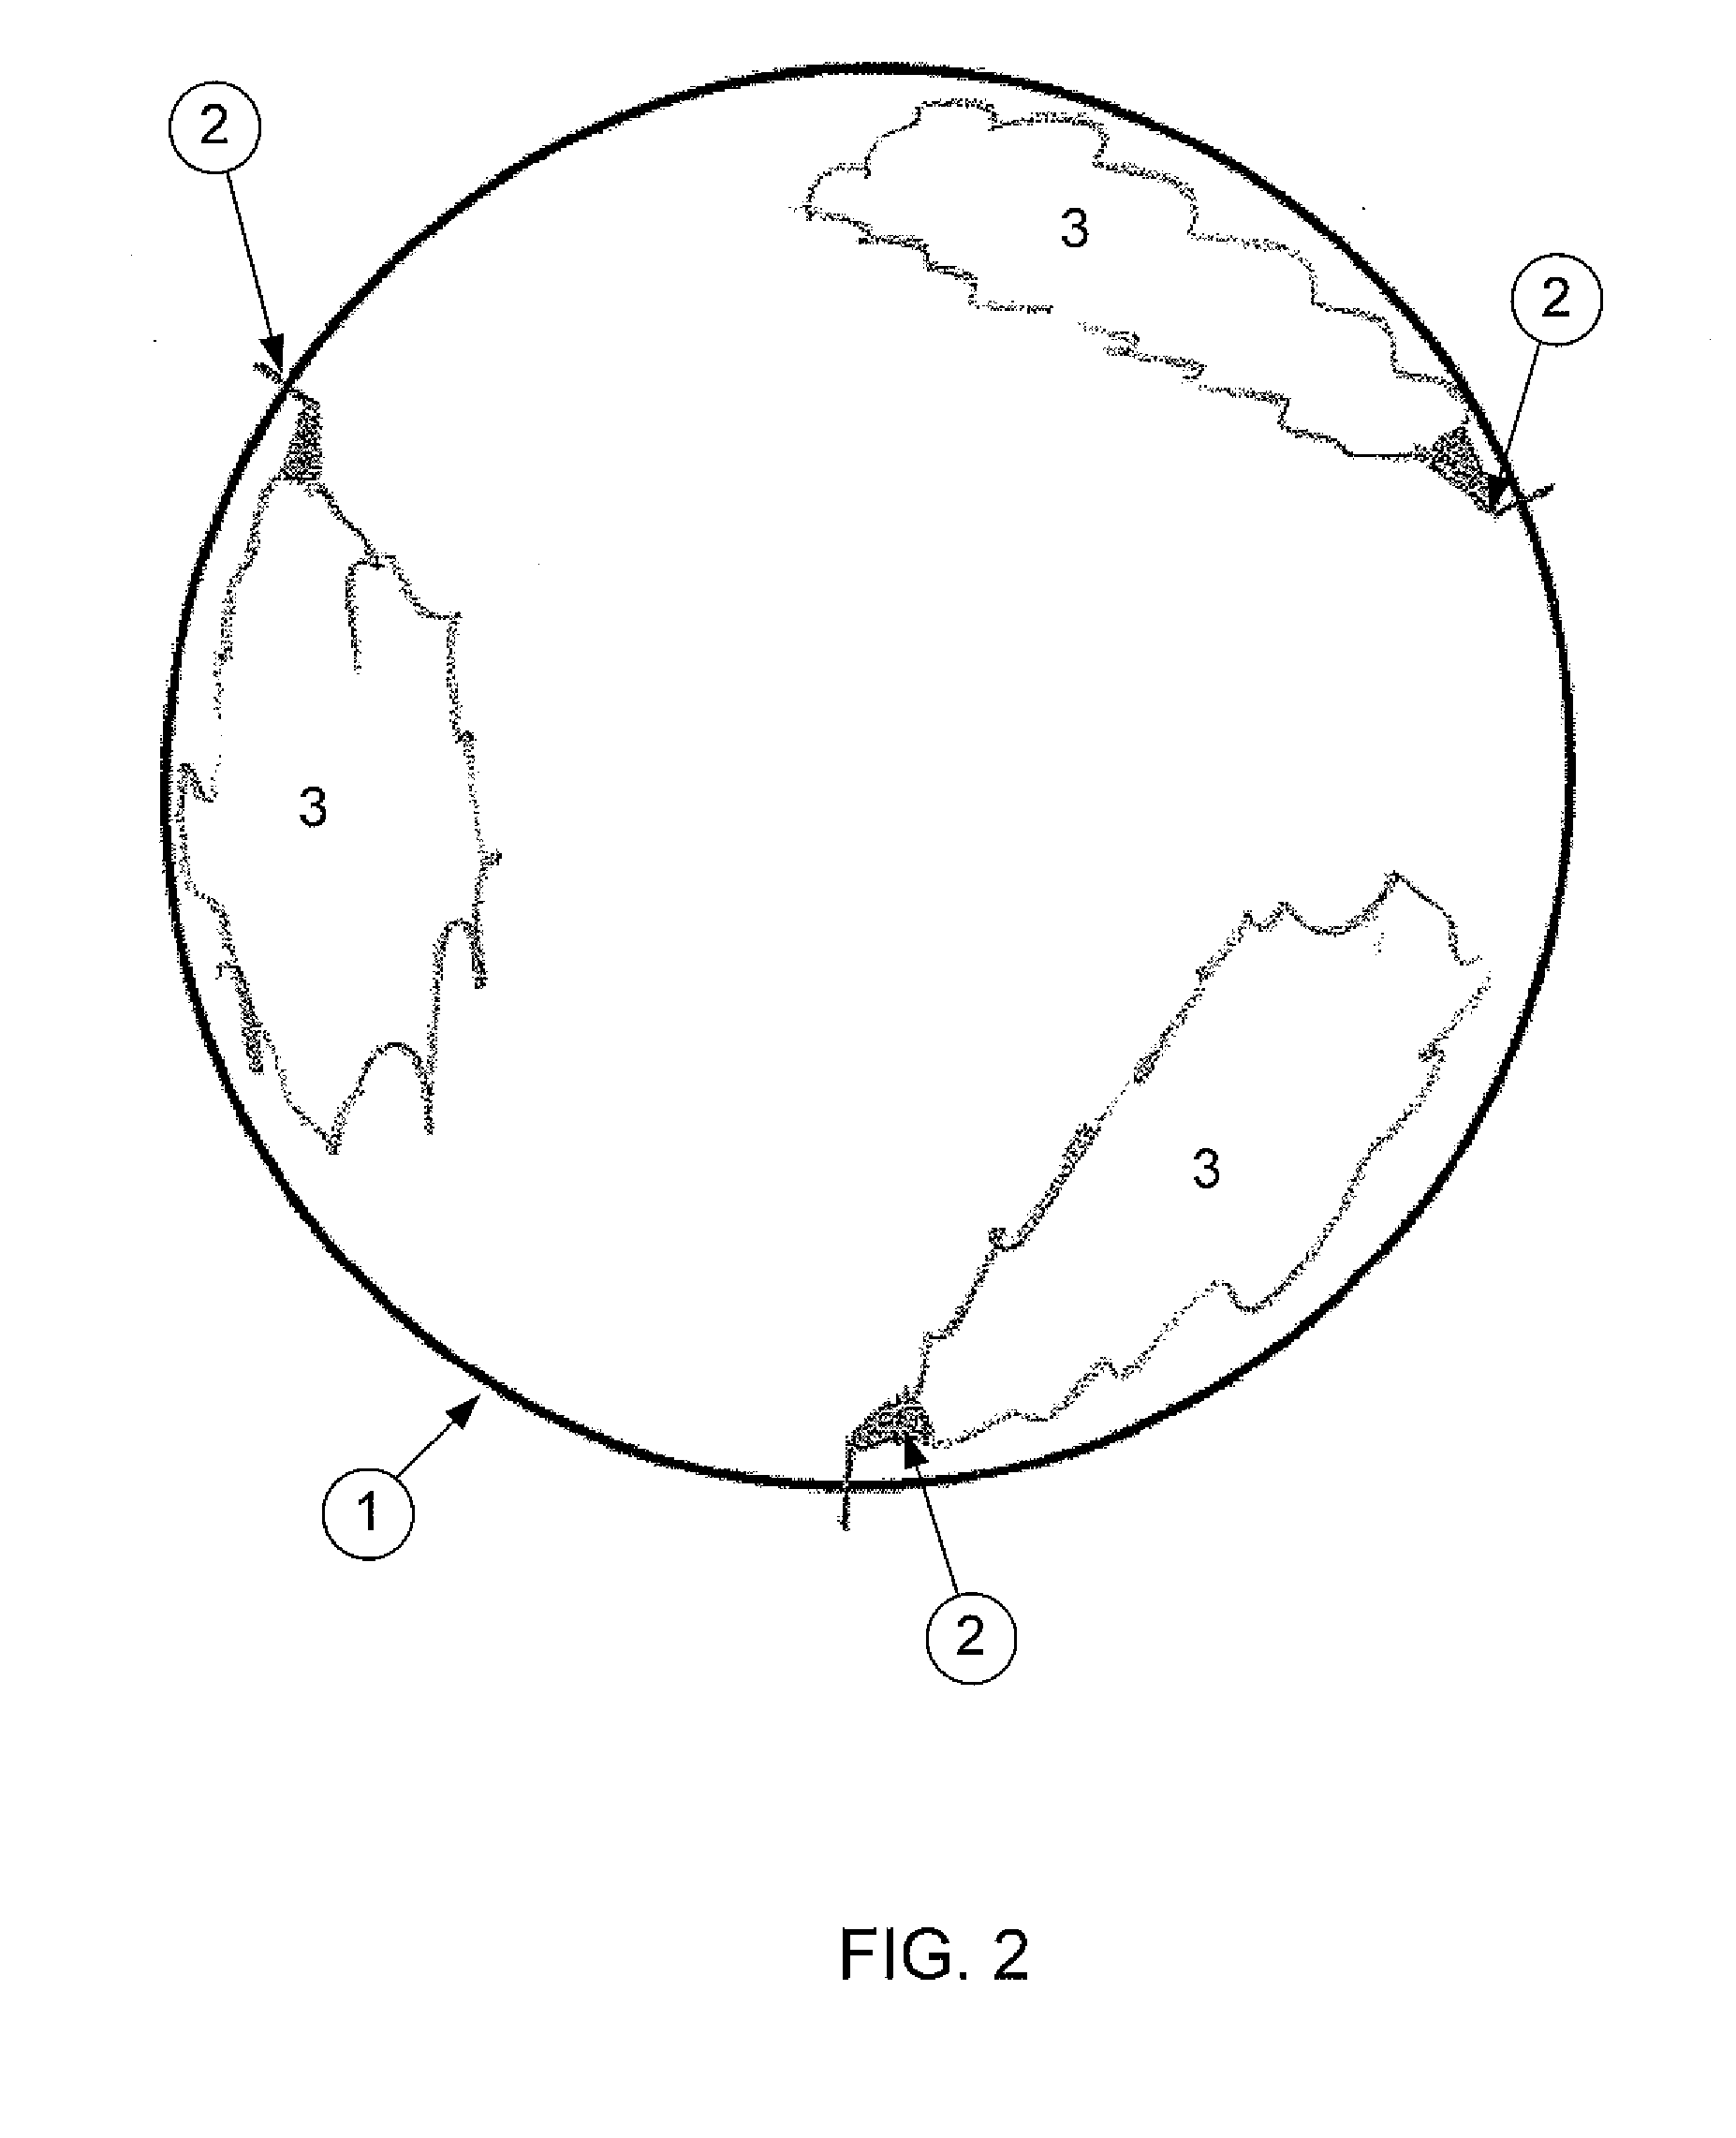 Method for extinguishing a smouldering fire in a silo